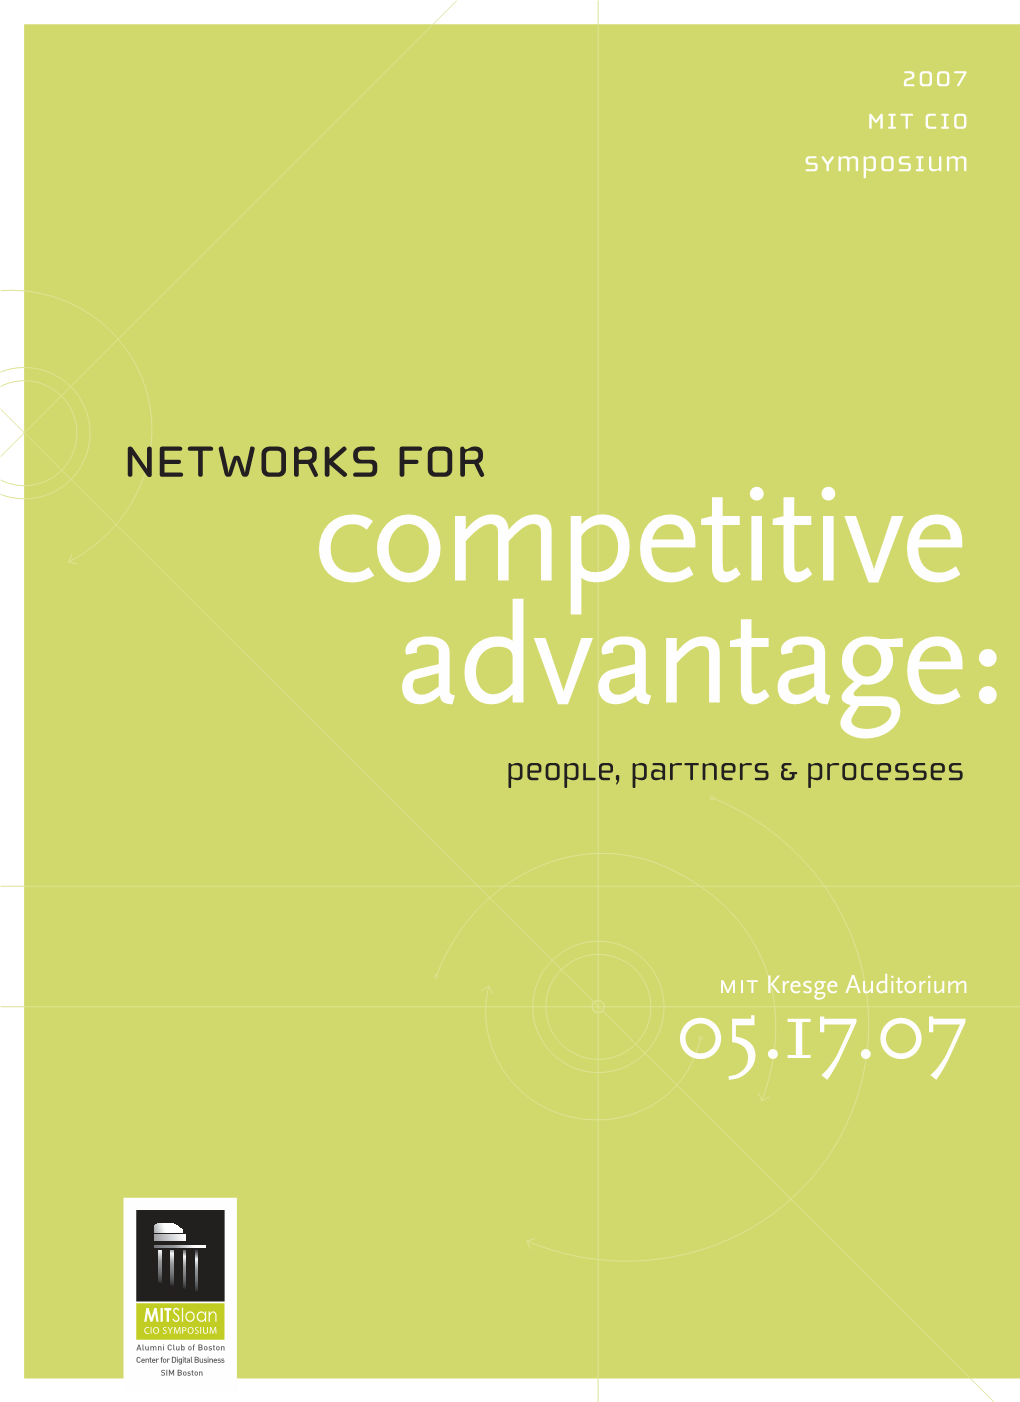 Networks for Competitive Advantage: People, Partners & Processes